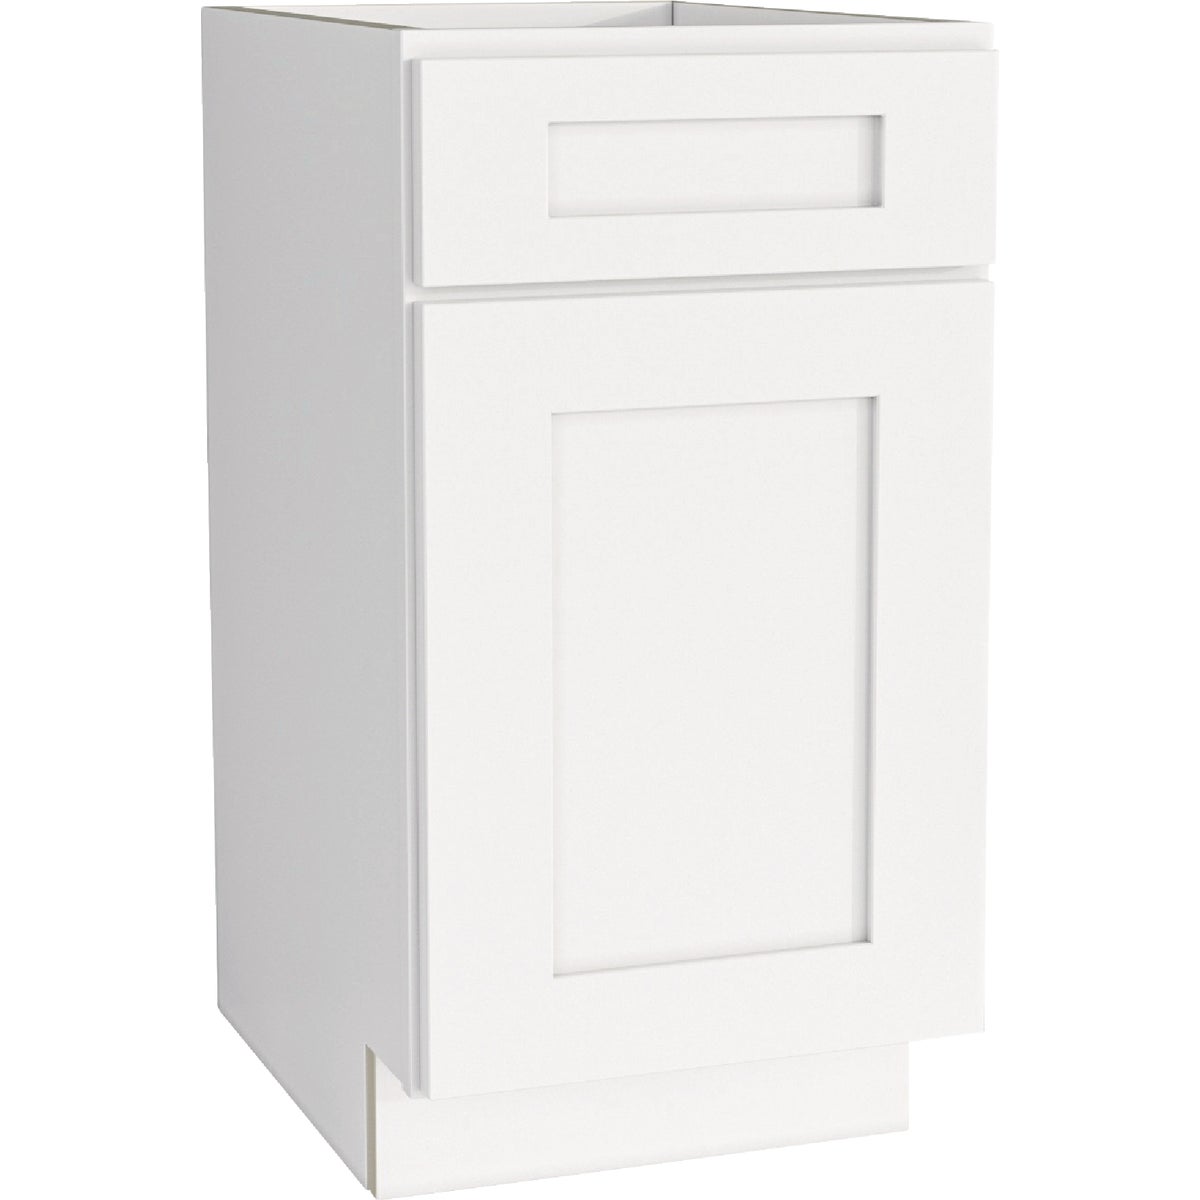 CraftMark Plymouth Shaker 18 In. W x 24 In. D x 34.5 In. H Ready To Assemble White Base Kitchen Cabinet